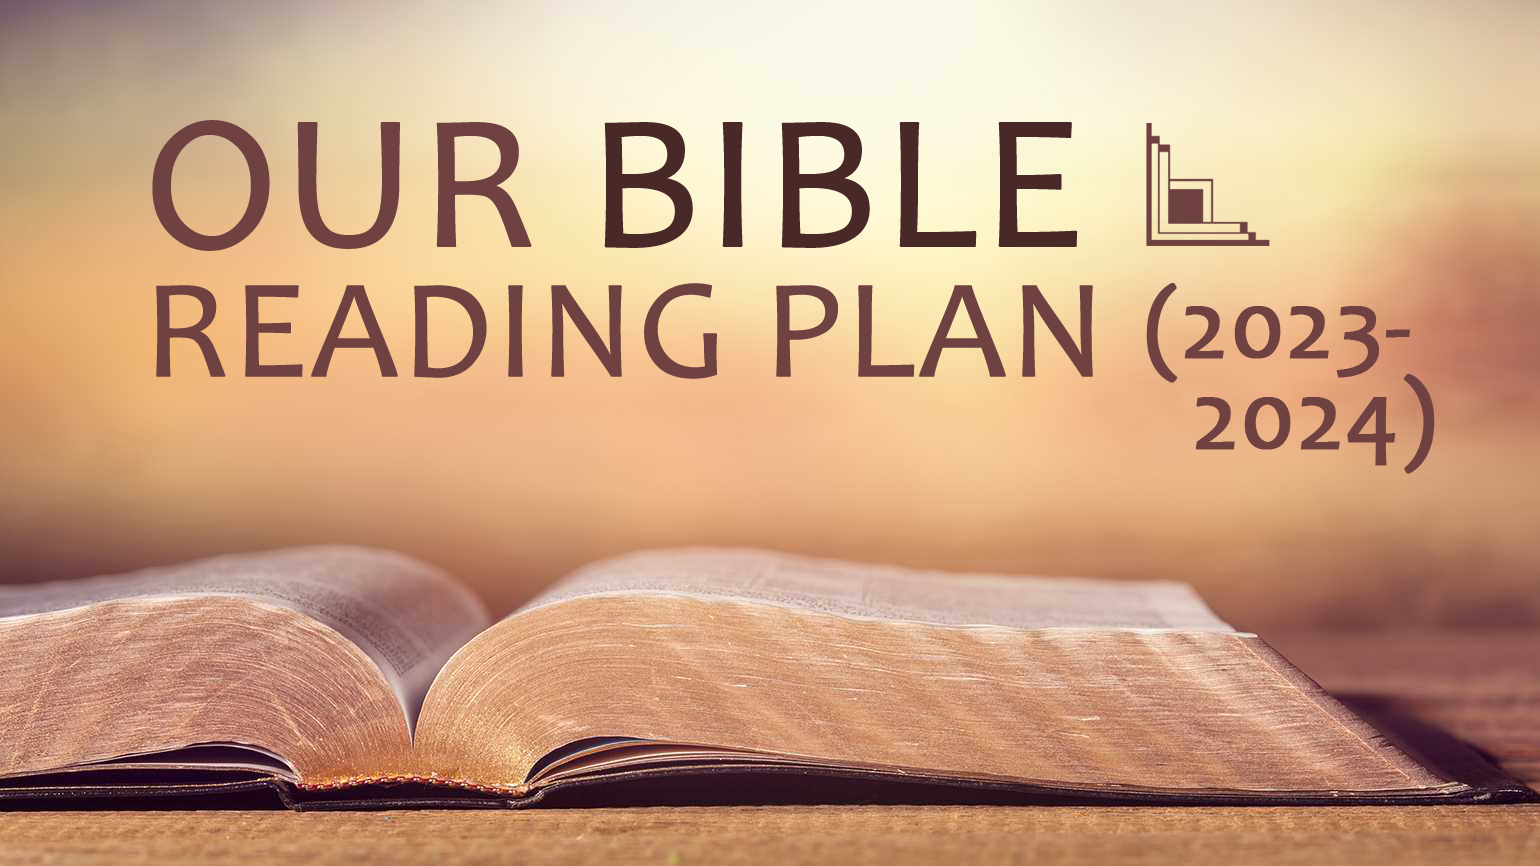 Our Bible Reading Plan (2023-2024)